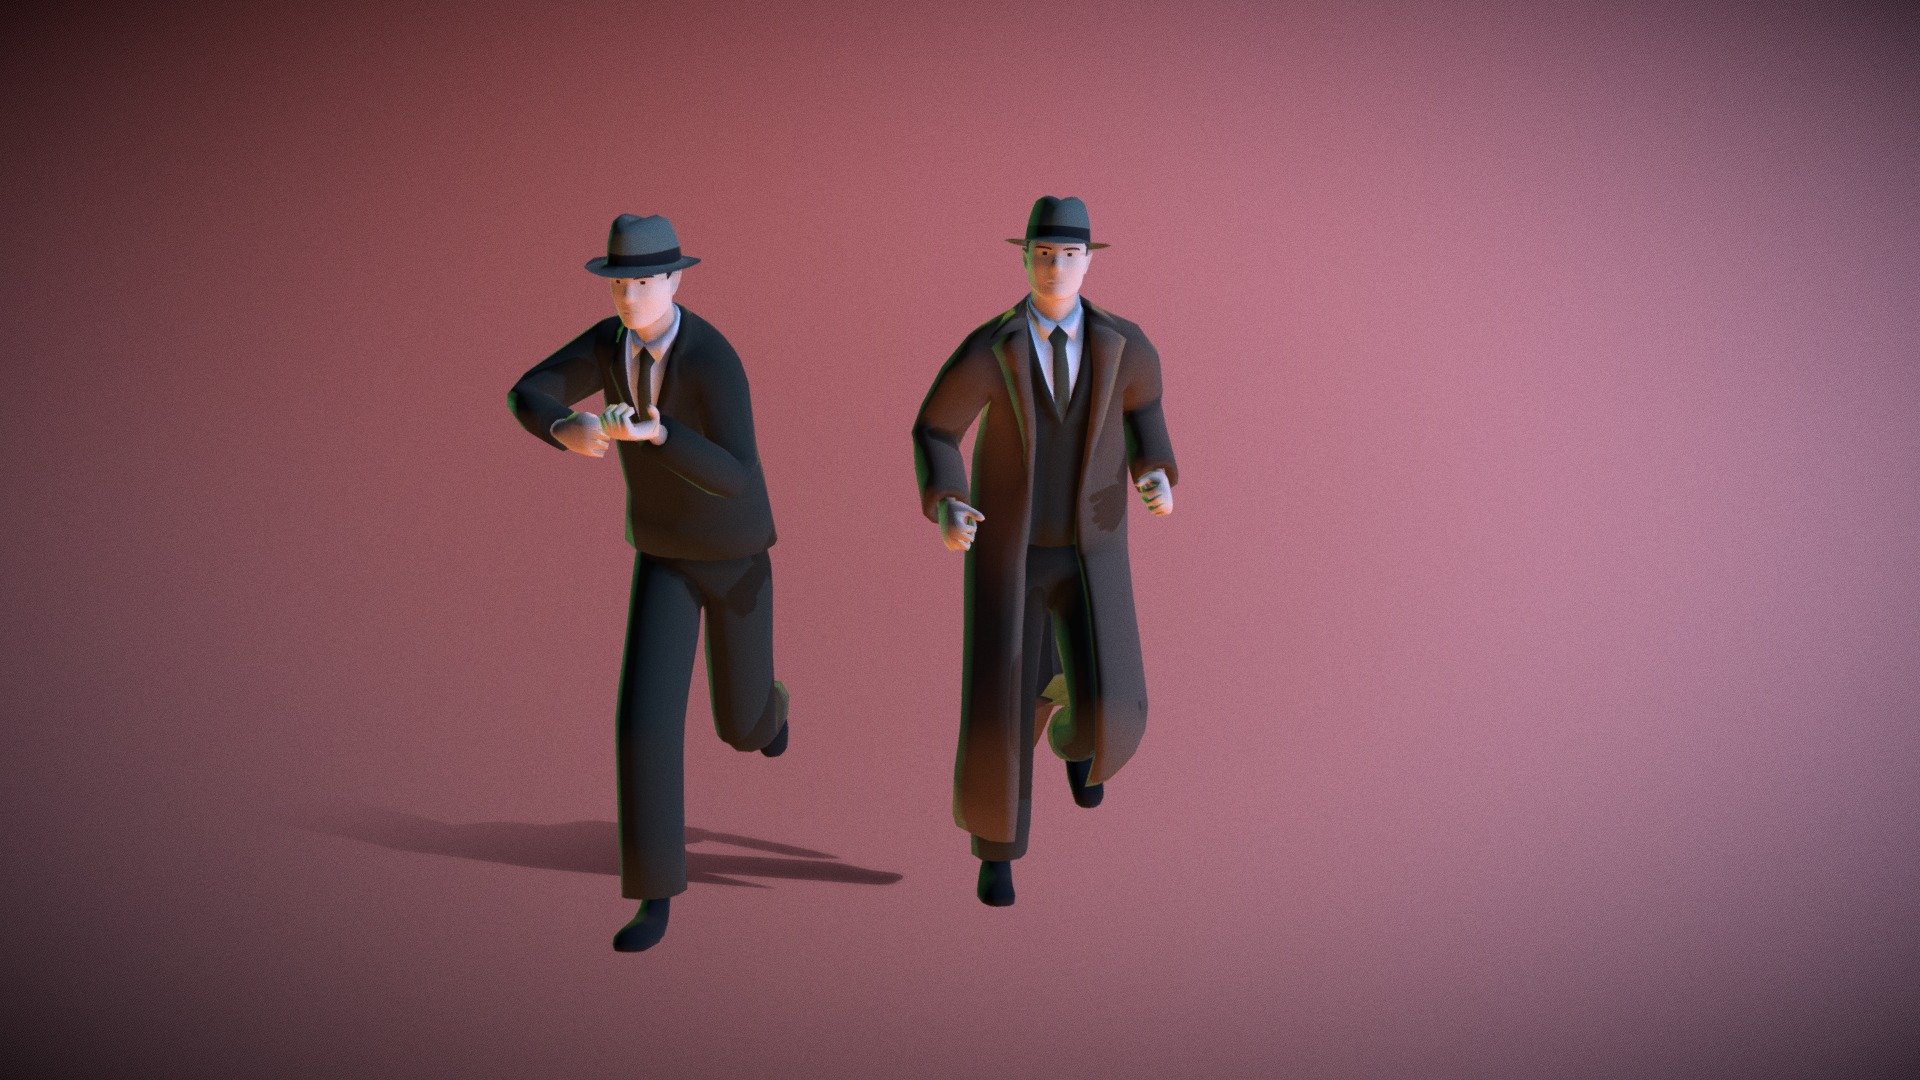 I optimized low-poly detective model I created in the past.
https://sketchfab.com/3d-models/simply-stylized-male-detective-5f16d447960c480f90952d54a373ba0e

Previously, it contained extra meshes and vertex counts, and we improved the system with human anatomy in mind and were able to significantly reduce the number of triangles.
The previous model was covered with a coat, which sometimes overlapped during animation, causing the legs to protrude outward, but this model is assimilated into the coat and does not collapse when animated.

So there are two models, one is in coat, another is in suits. And they both wear a hut but it can be removed/hidden as you like.

Detective in Coat and with Hat
Vertices: 2,727
Triangles:5,428

Detective in Suits and with Hat
Vertices: 2,495
Triangles:4,968

🔎Check my other low-poly models. https://linktr.ee/gheimwerk

🎮Get reward of Playstation Store $100! http://rwrdzy.com/198179/398

💻Get Reward of MacBook Pro! http://rwrdzy.com/198179/137 - Stylized Detective Optimised Version - 3D model by owowowsam 3d model